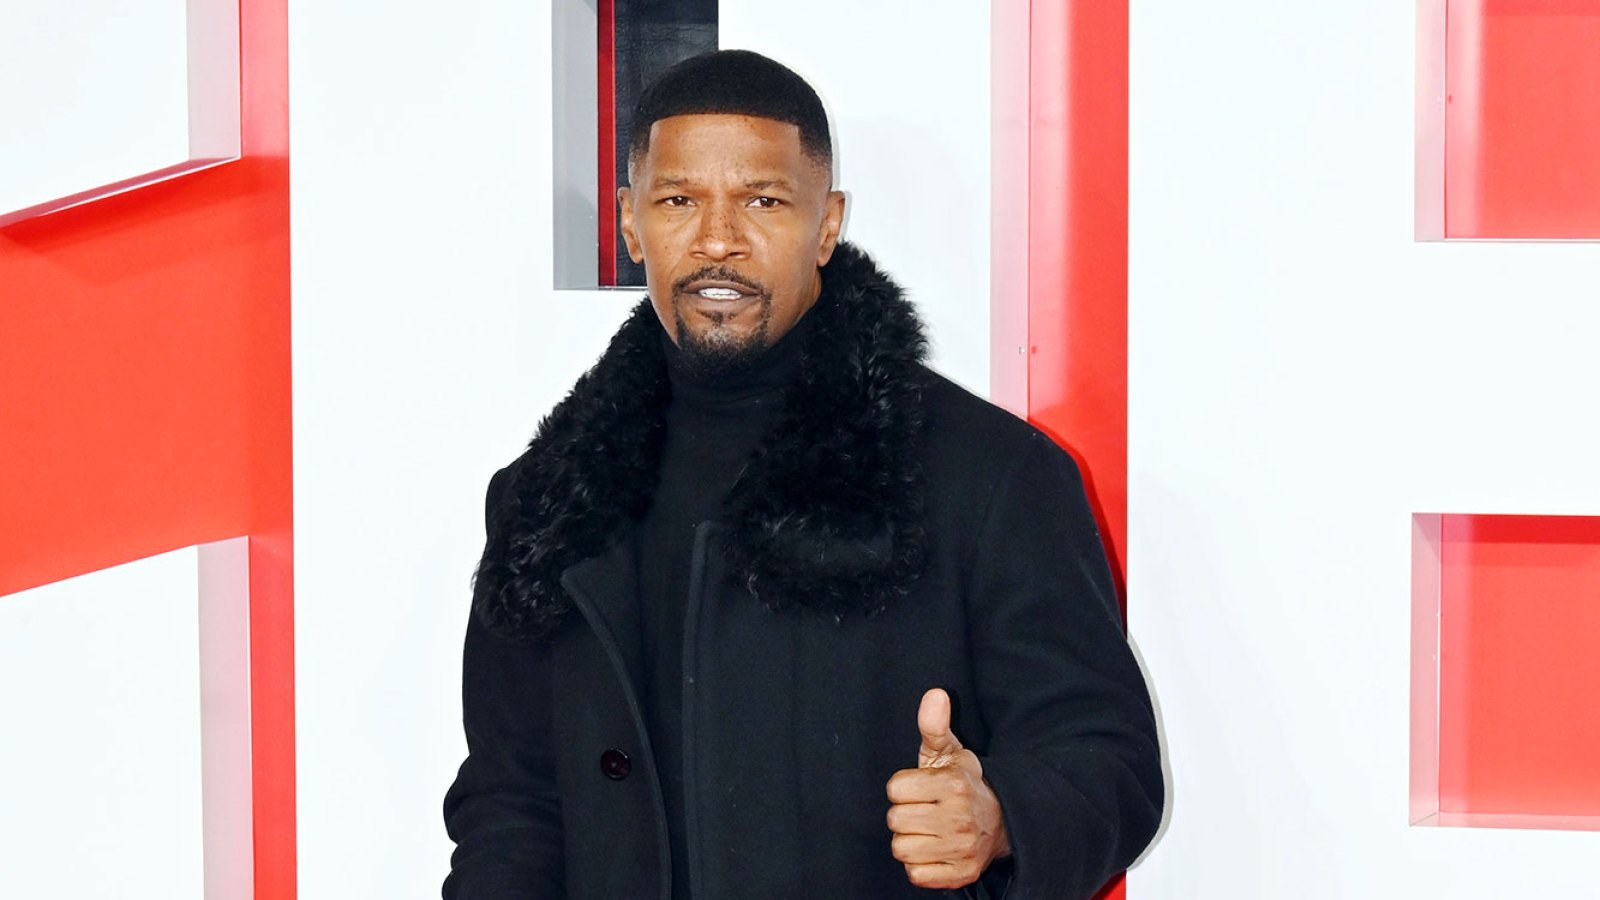 Jamie Foxx Is in Recovery After ‘Medical Complication